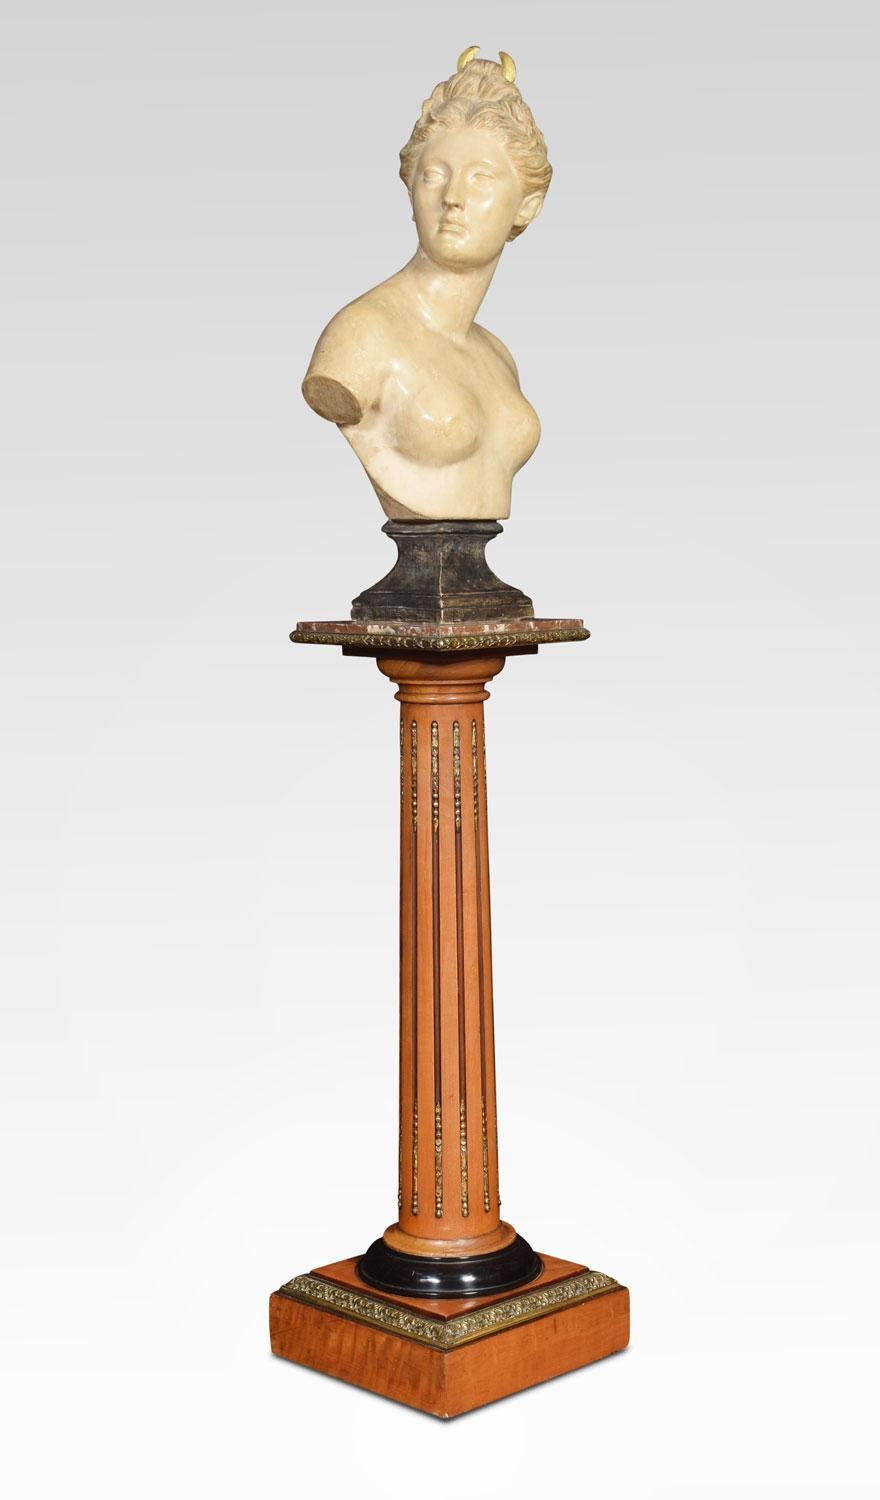 Satinwood gilt metal mounted torchiere stand. Having square rouge marble top on a fluted turned column and square plinth base.
Dimensions:
Height 39.5 inches
Width 14 inches
Depth 14 inches